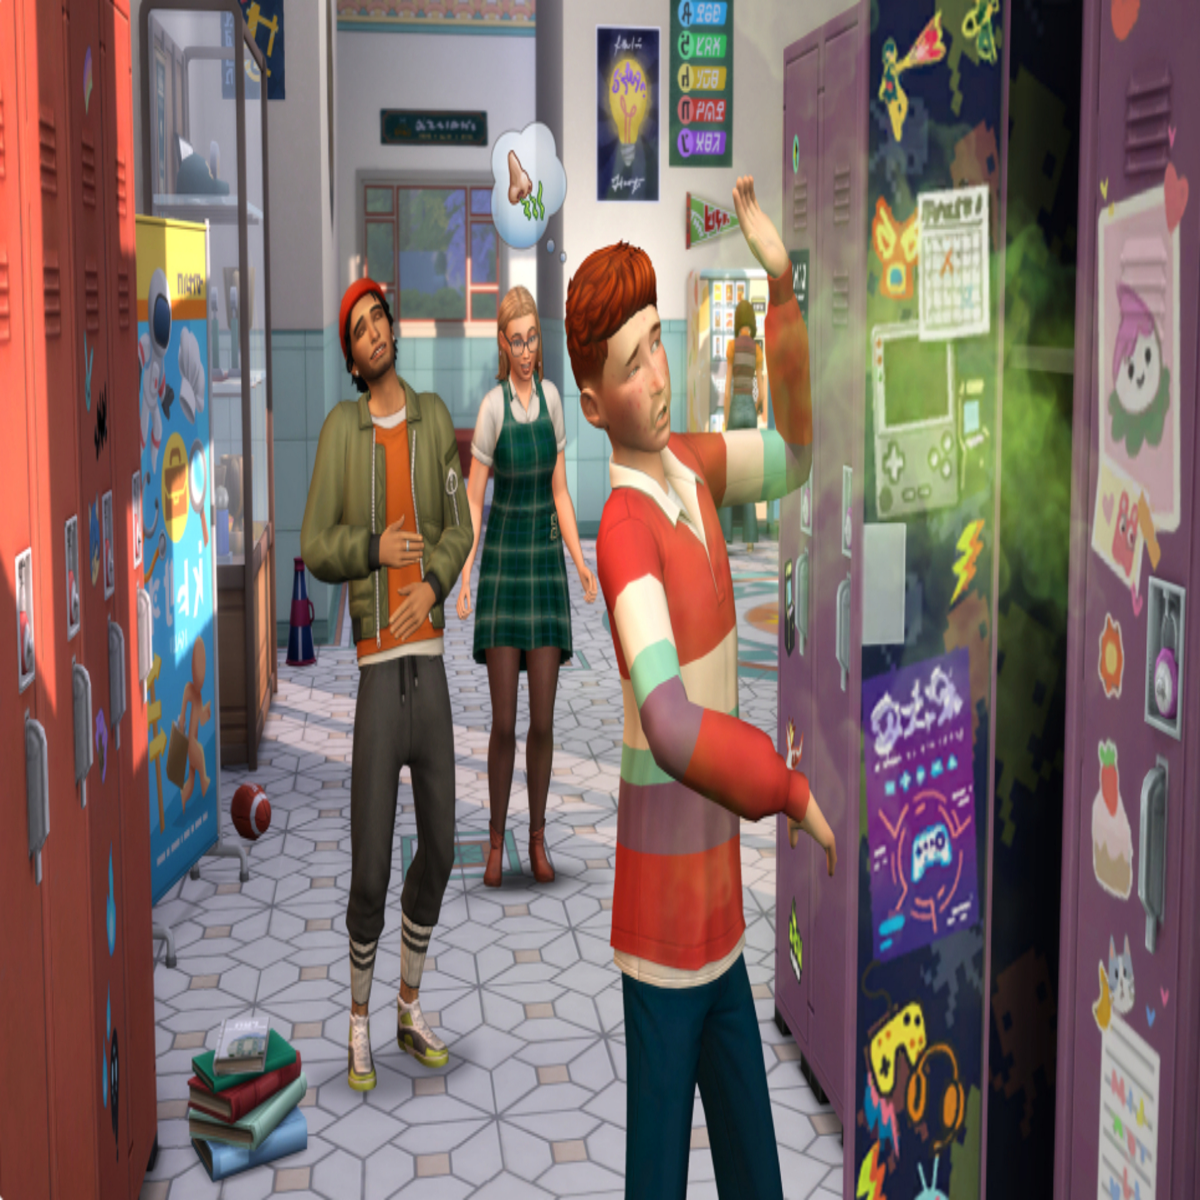 Play Sims 4 Free With Origin Game Time - GameSpot